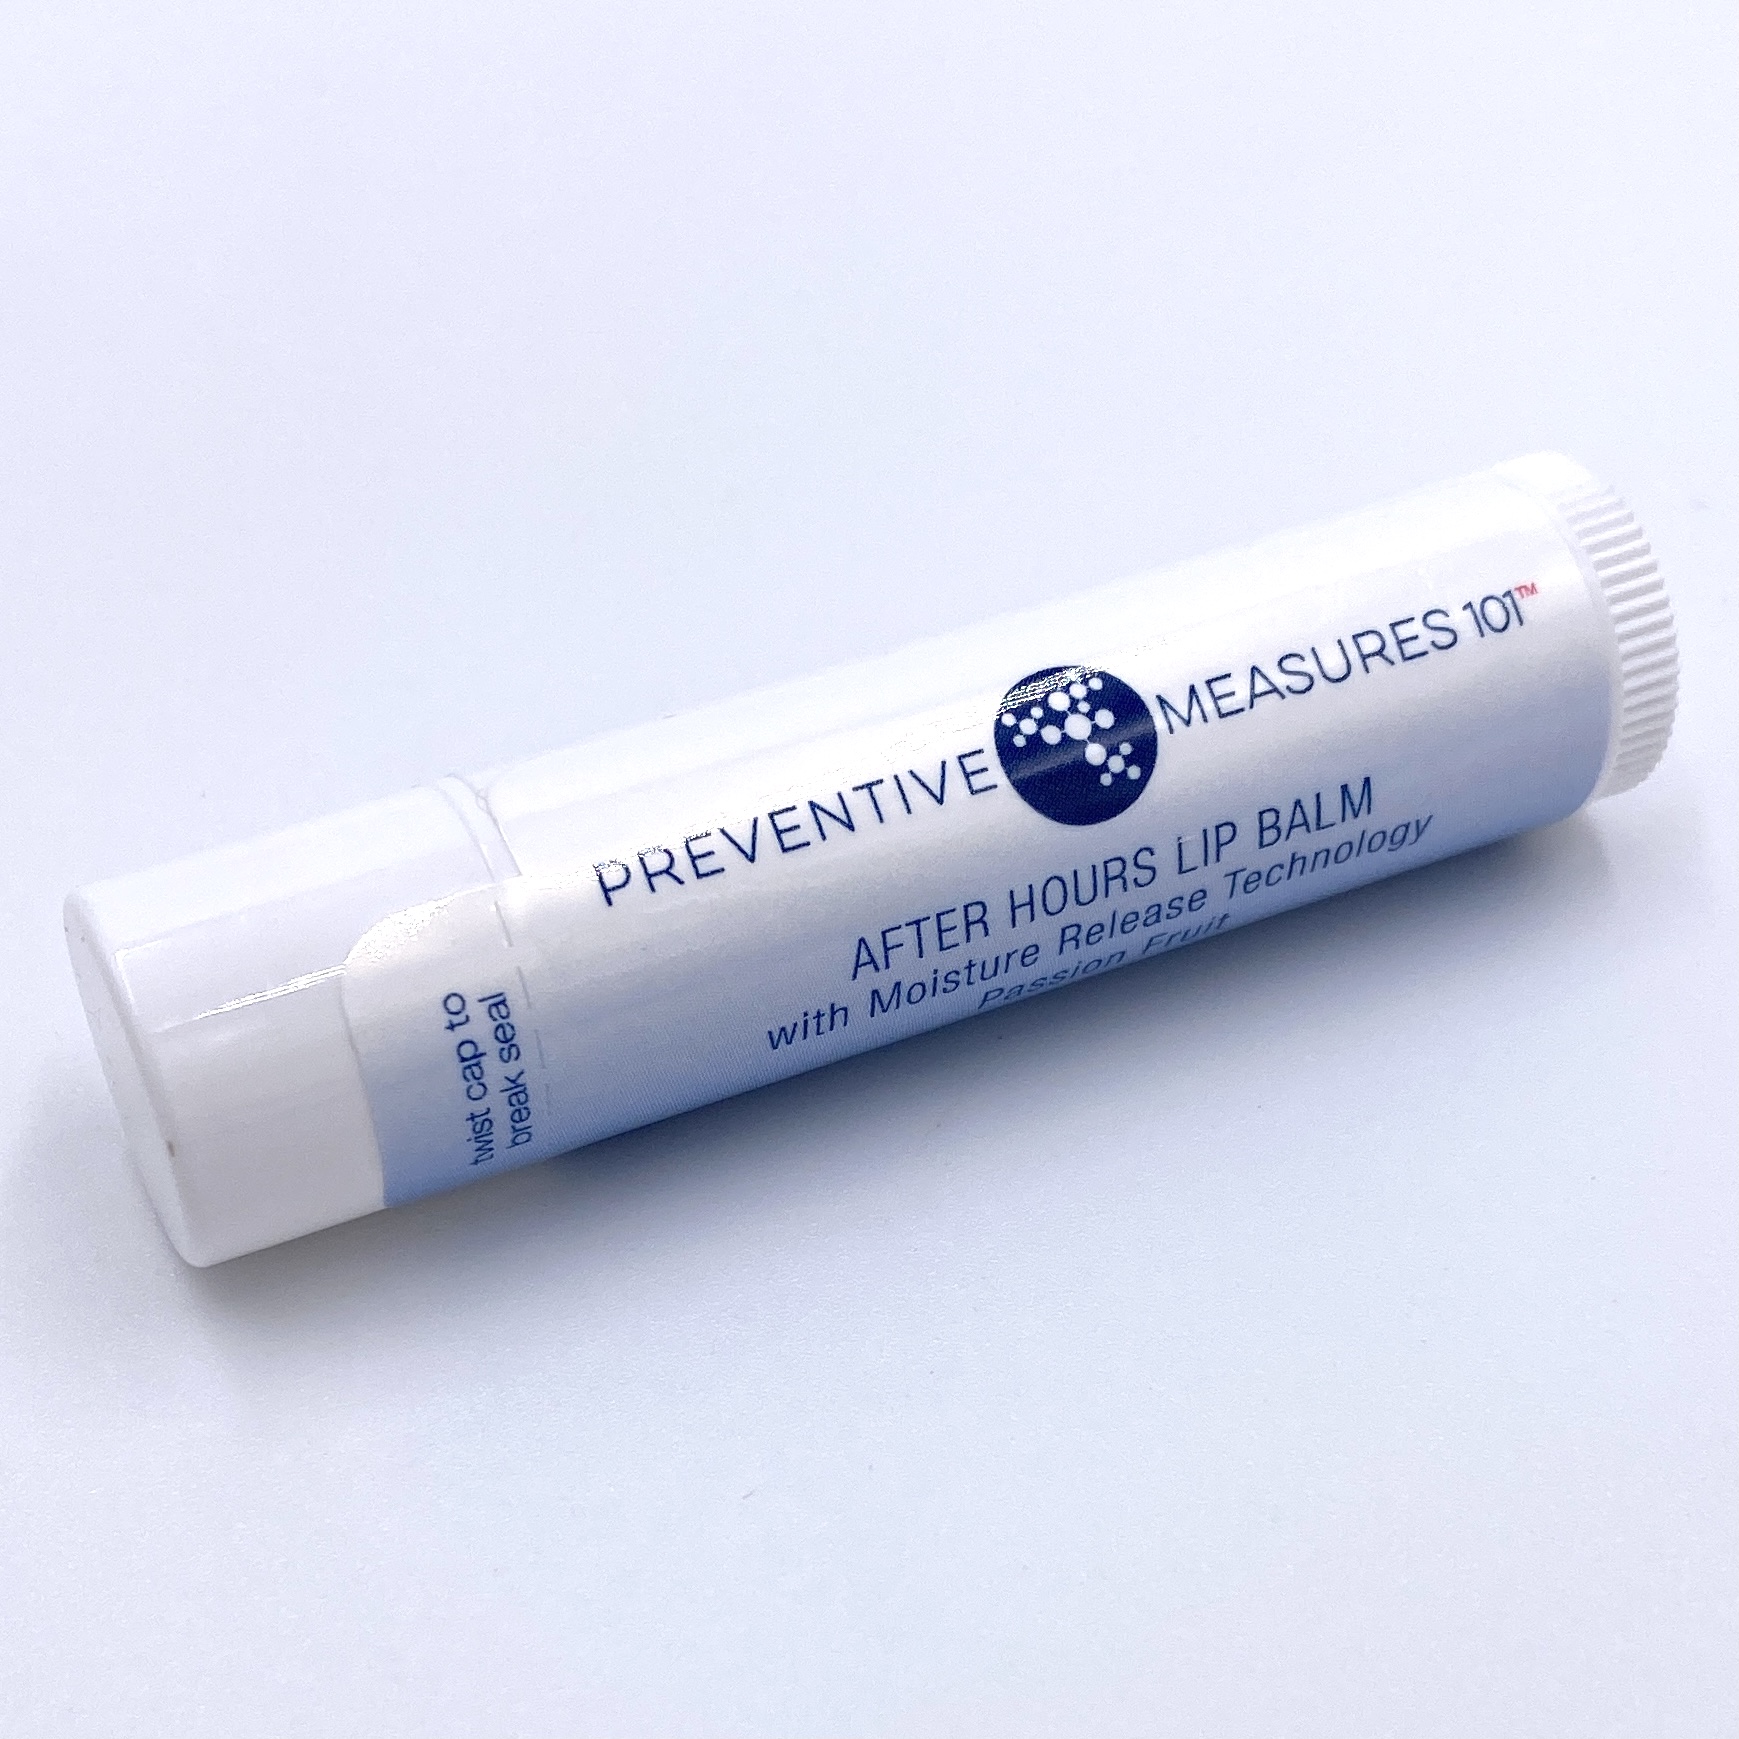 Preventative Measures 101 After Hours Lip Balm in Passionfruit Front for the Ipsy Glam Bag December 2020